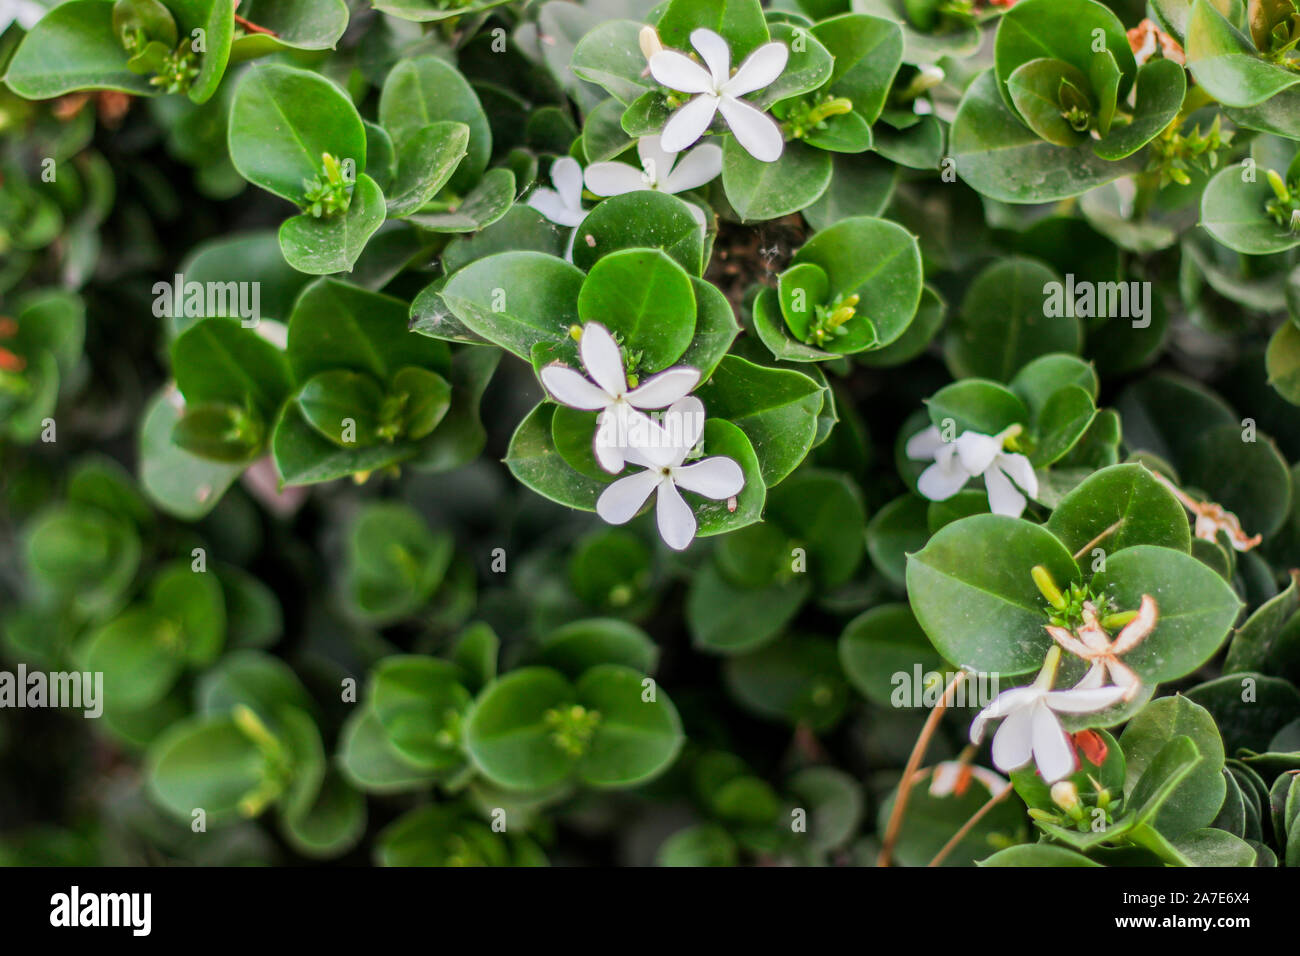 Carissa macrocarpa is a spiny, evergreen shrub containing latex. It produces shuny, deep green leaves and snowy white flowers. The ornamental plump, r Stock Photo